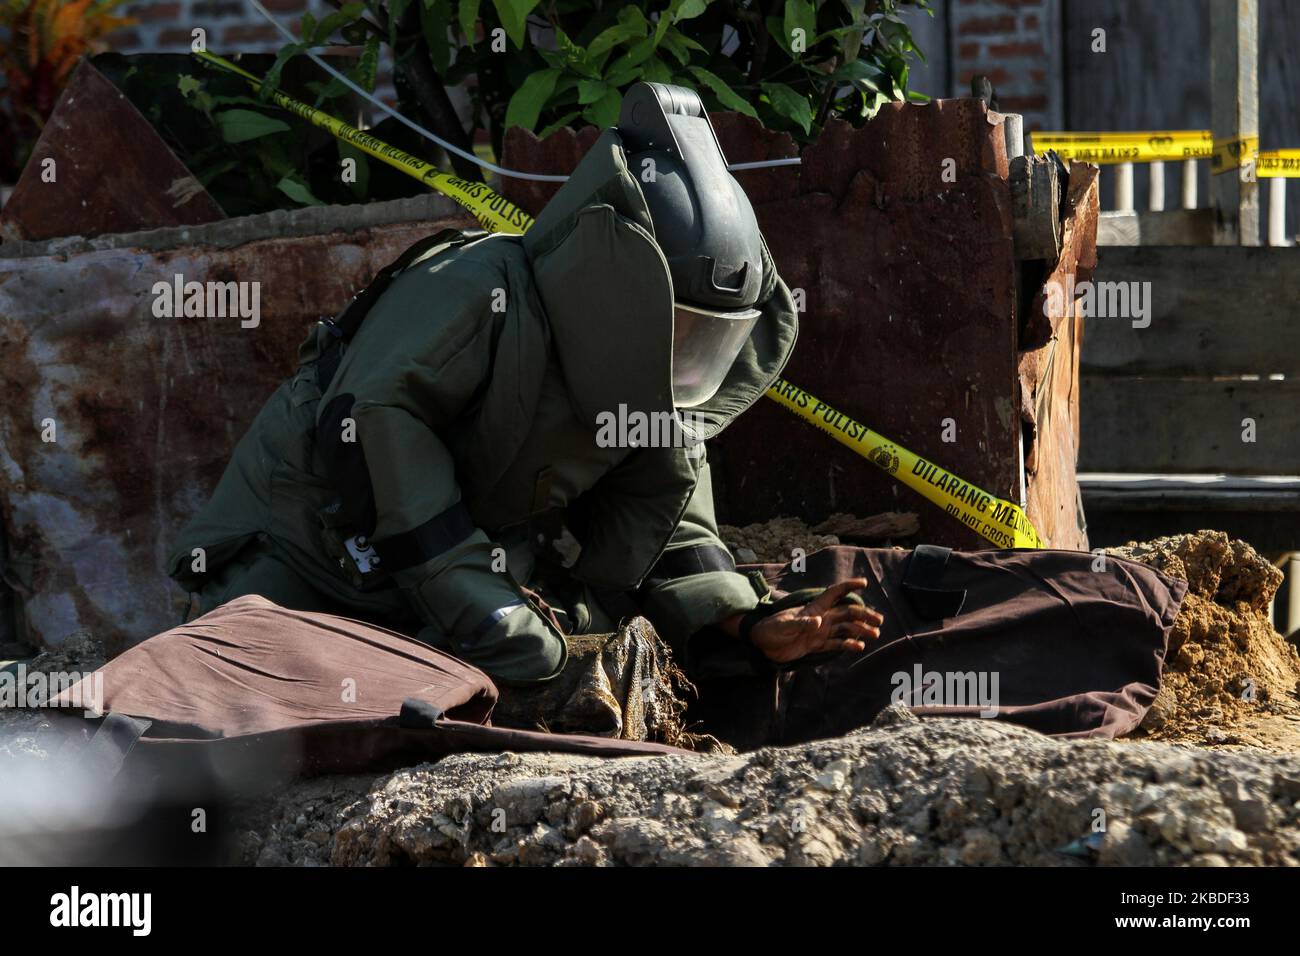 Members of the Indonesian bomb squad evacuated an object suspected of being a bomb at a residential area in Lhokseumawe, on December 25, 2019, Aceh, Indonesia. The object, which has a length of around 50 cm, was discovered accidentally by residents who were digging in the yard, allegedly as a remnant of a bomb from a conflict that had occurred in Aceh. (Photo by Fachrul Reza/NurPhoto) Stock Photo